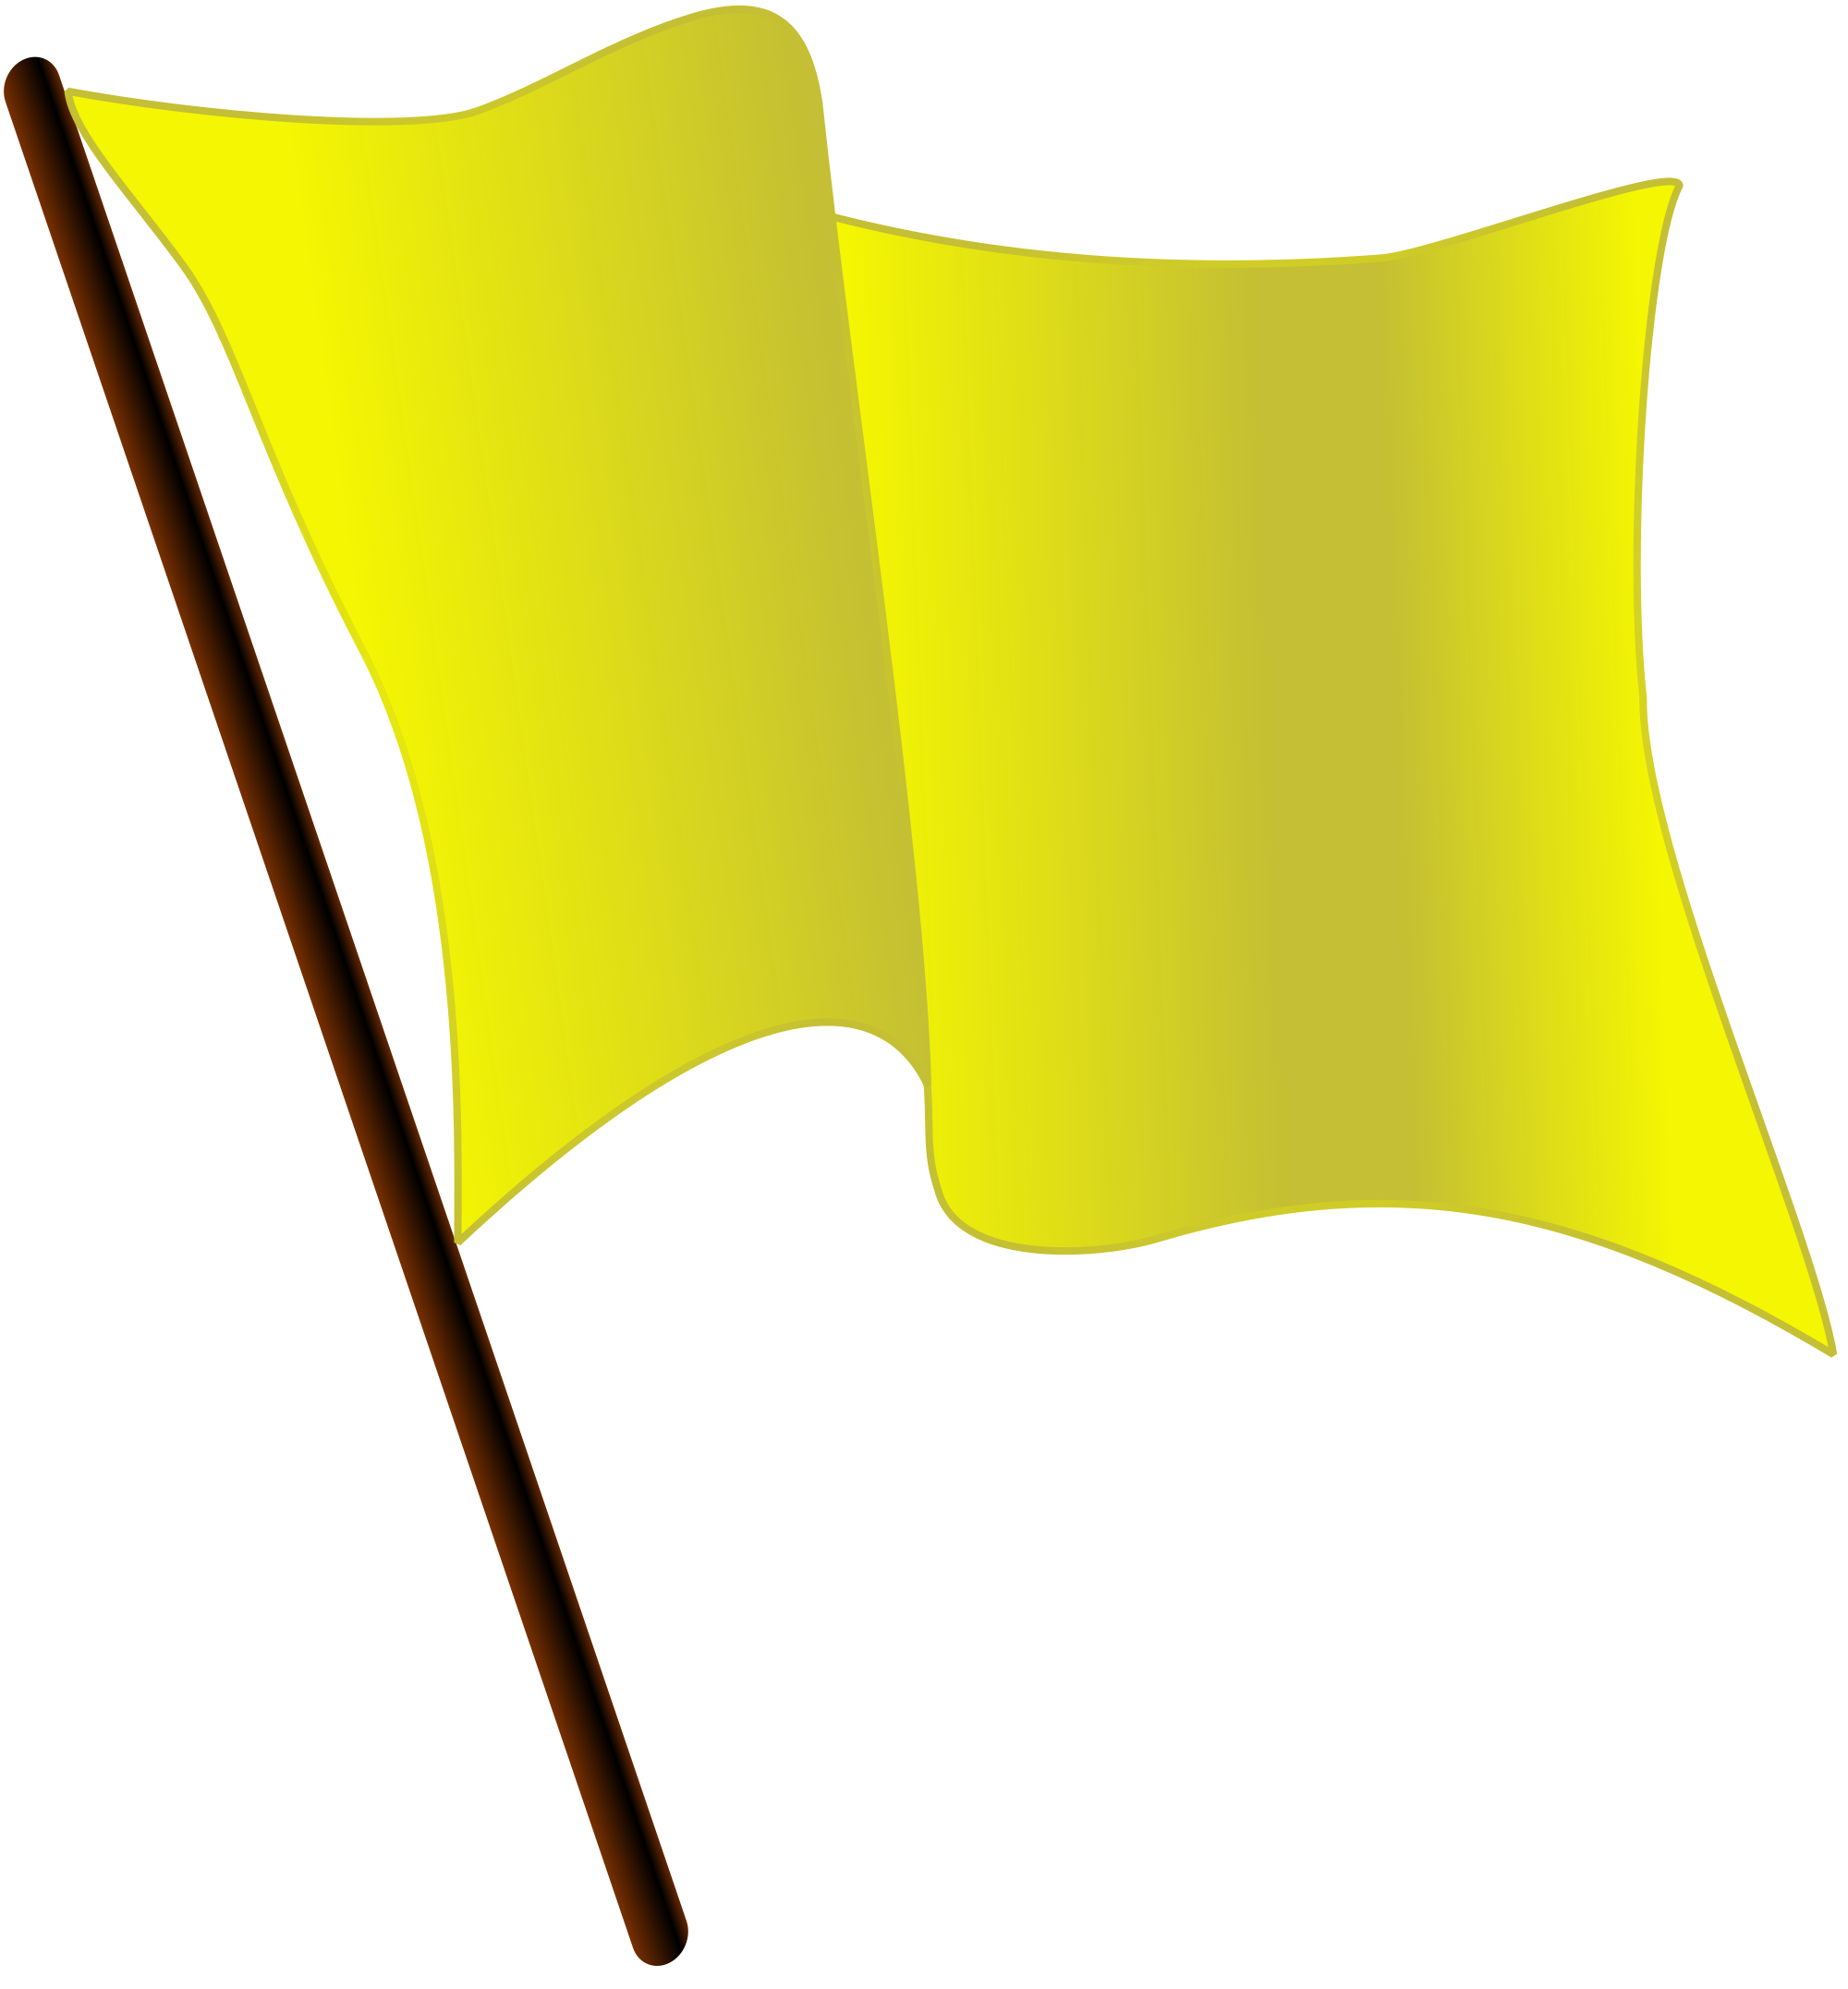 flags clipart yellow